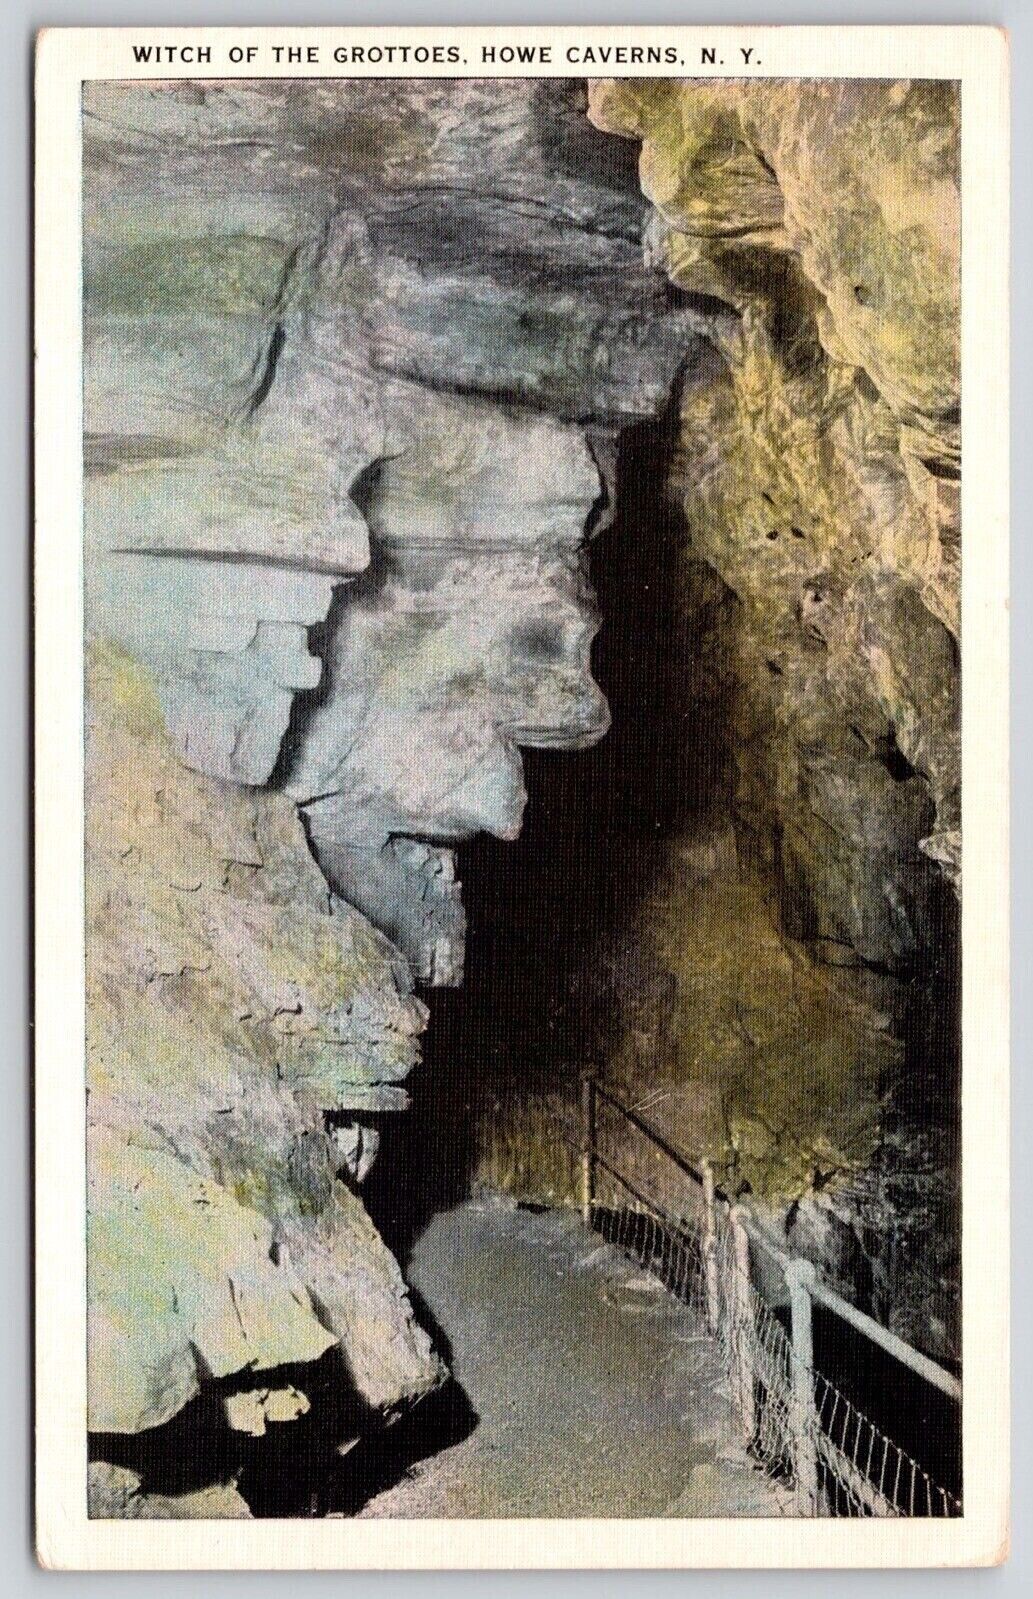 Witch Grottoes Howe Caverns New York Cave Interior Historic NY Vintage Postcard